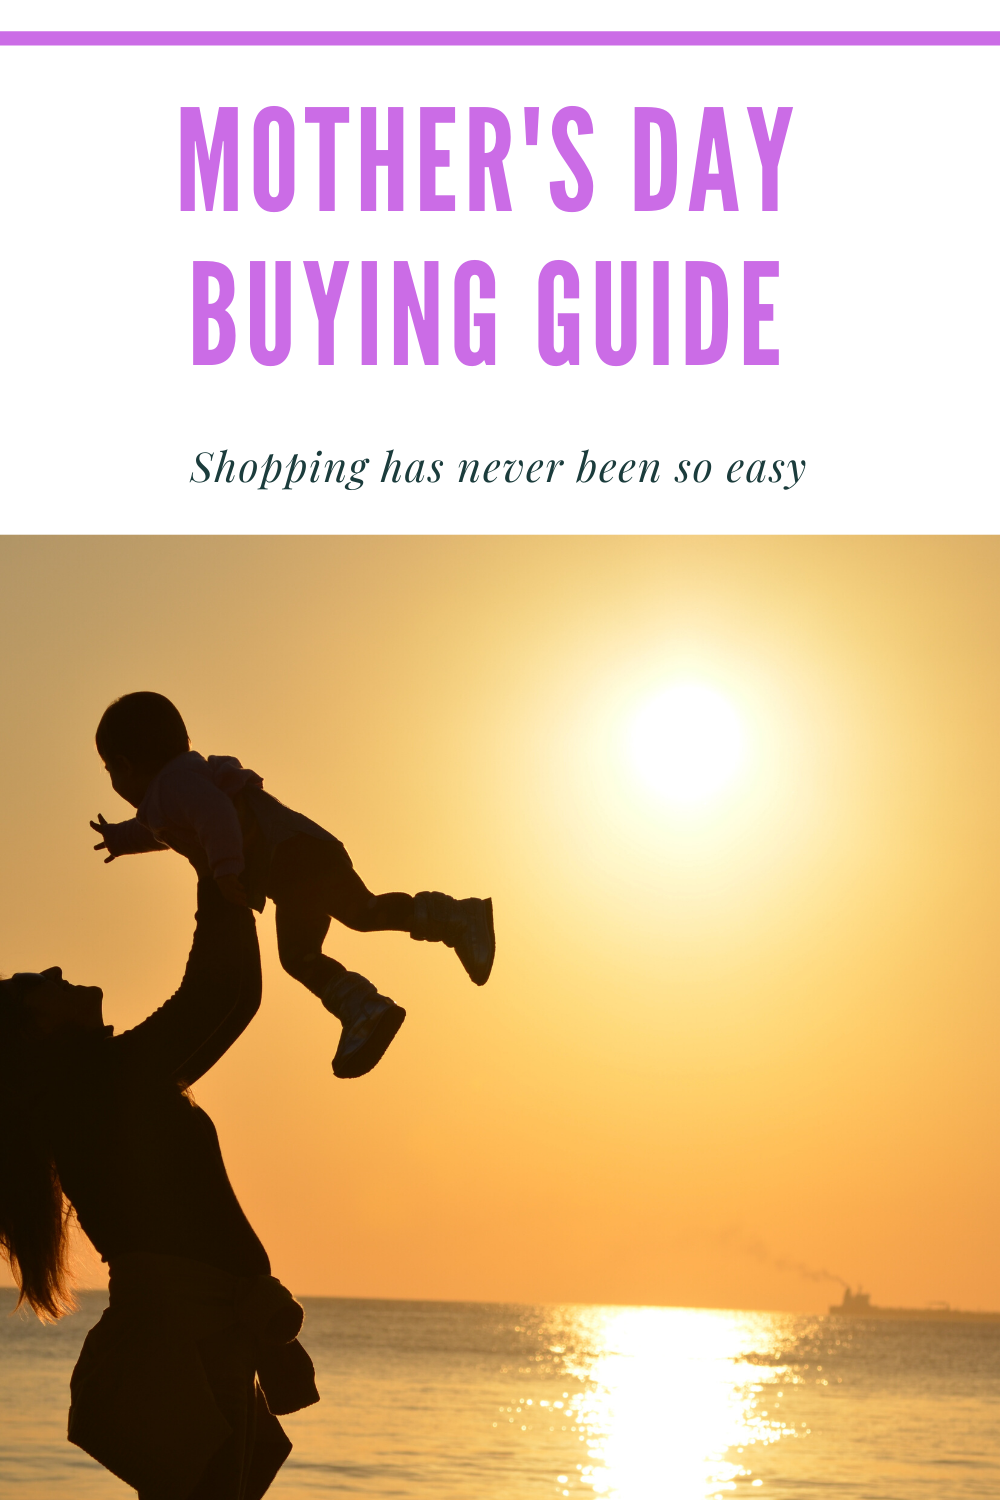 Mother’s Day 2020 Buying Guide